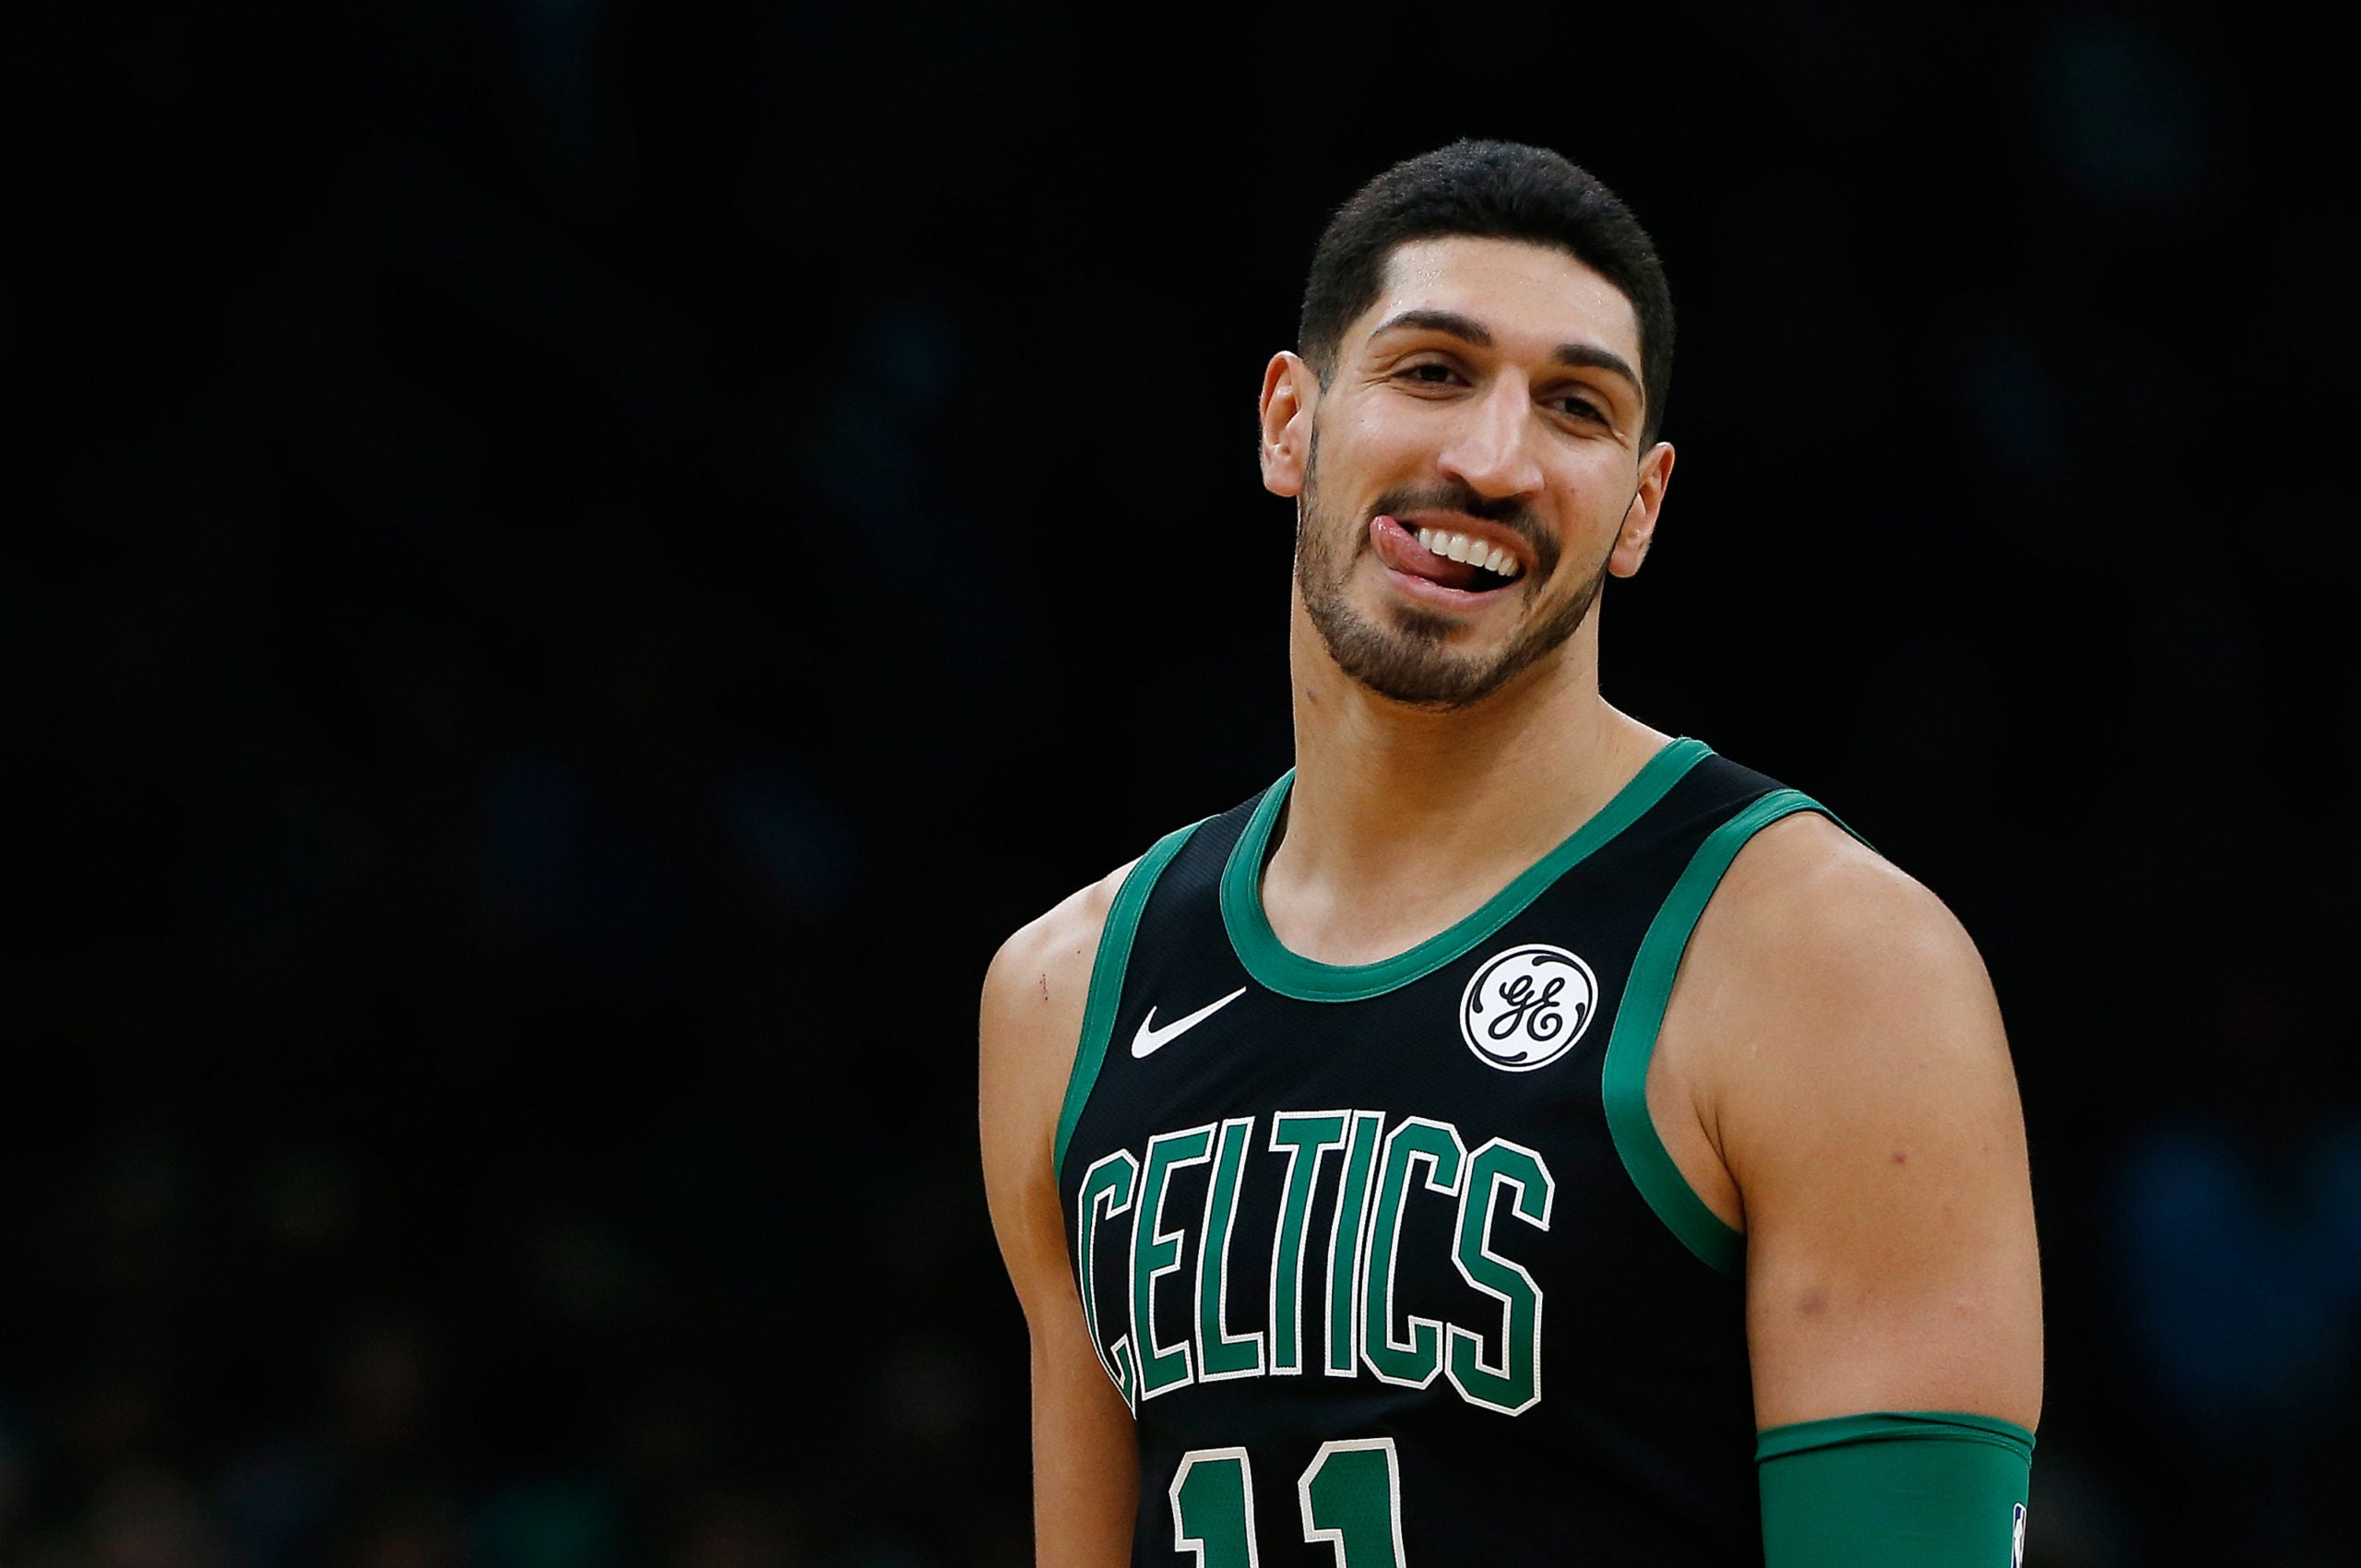 Enes Kanter Freedom predicts getting ousted from the NBA, then gets cut